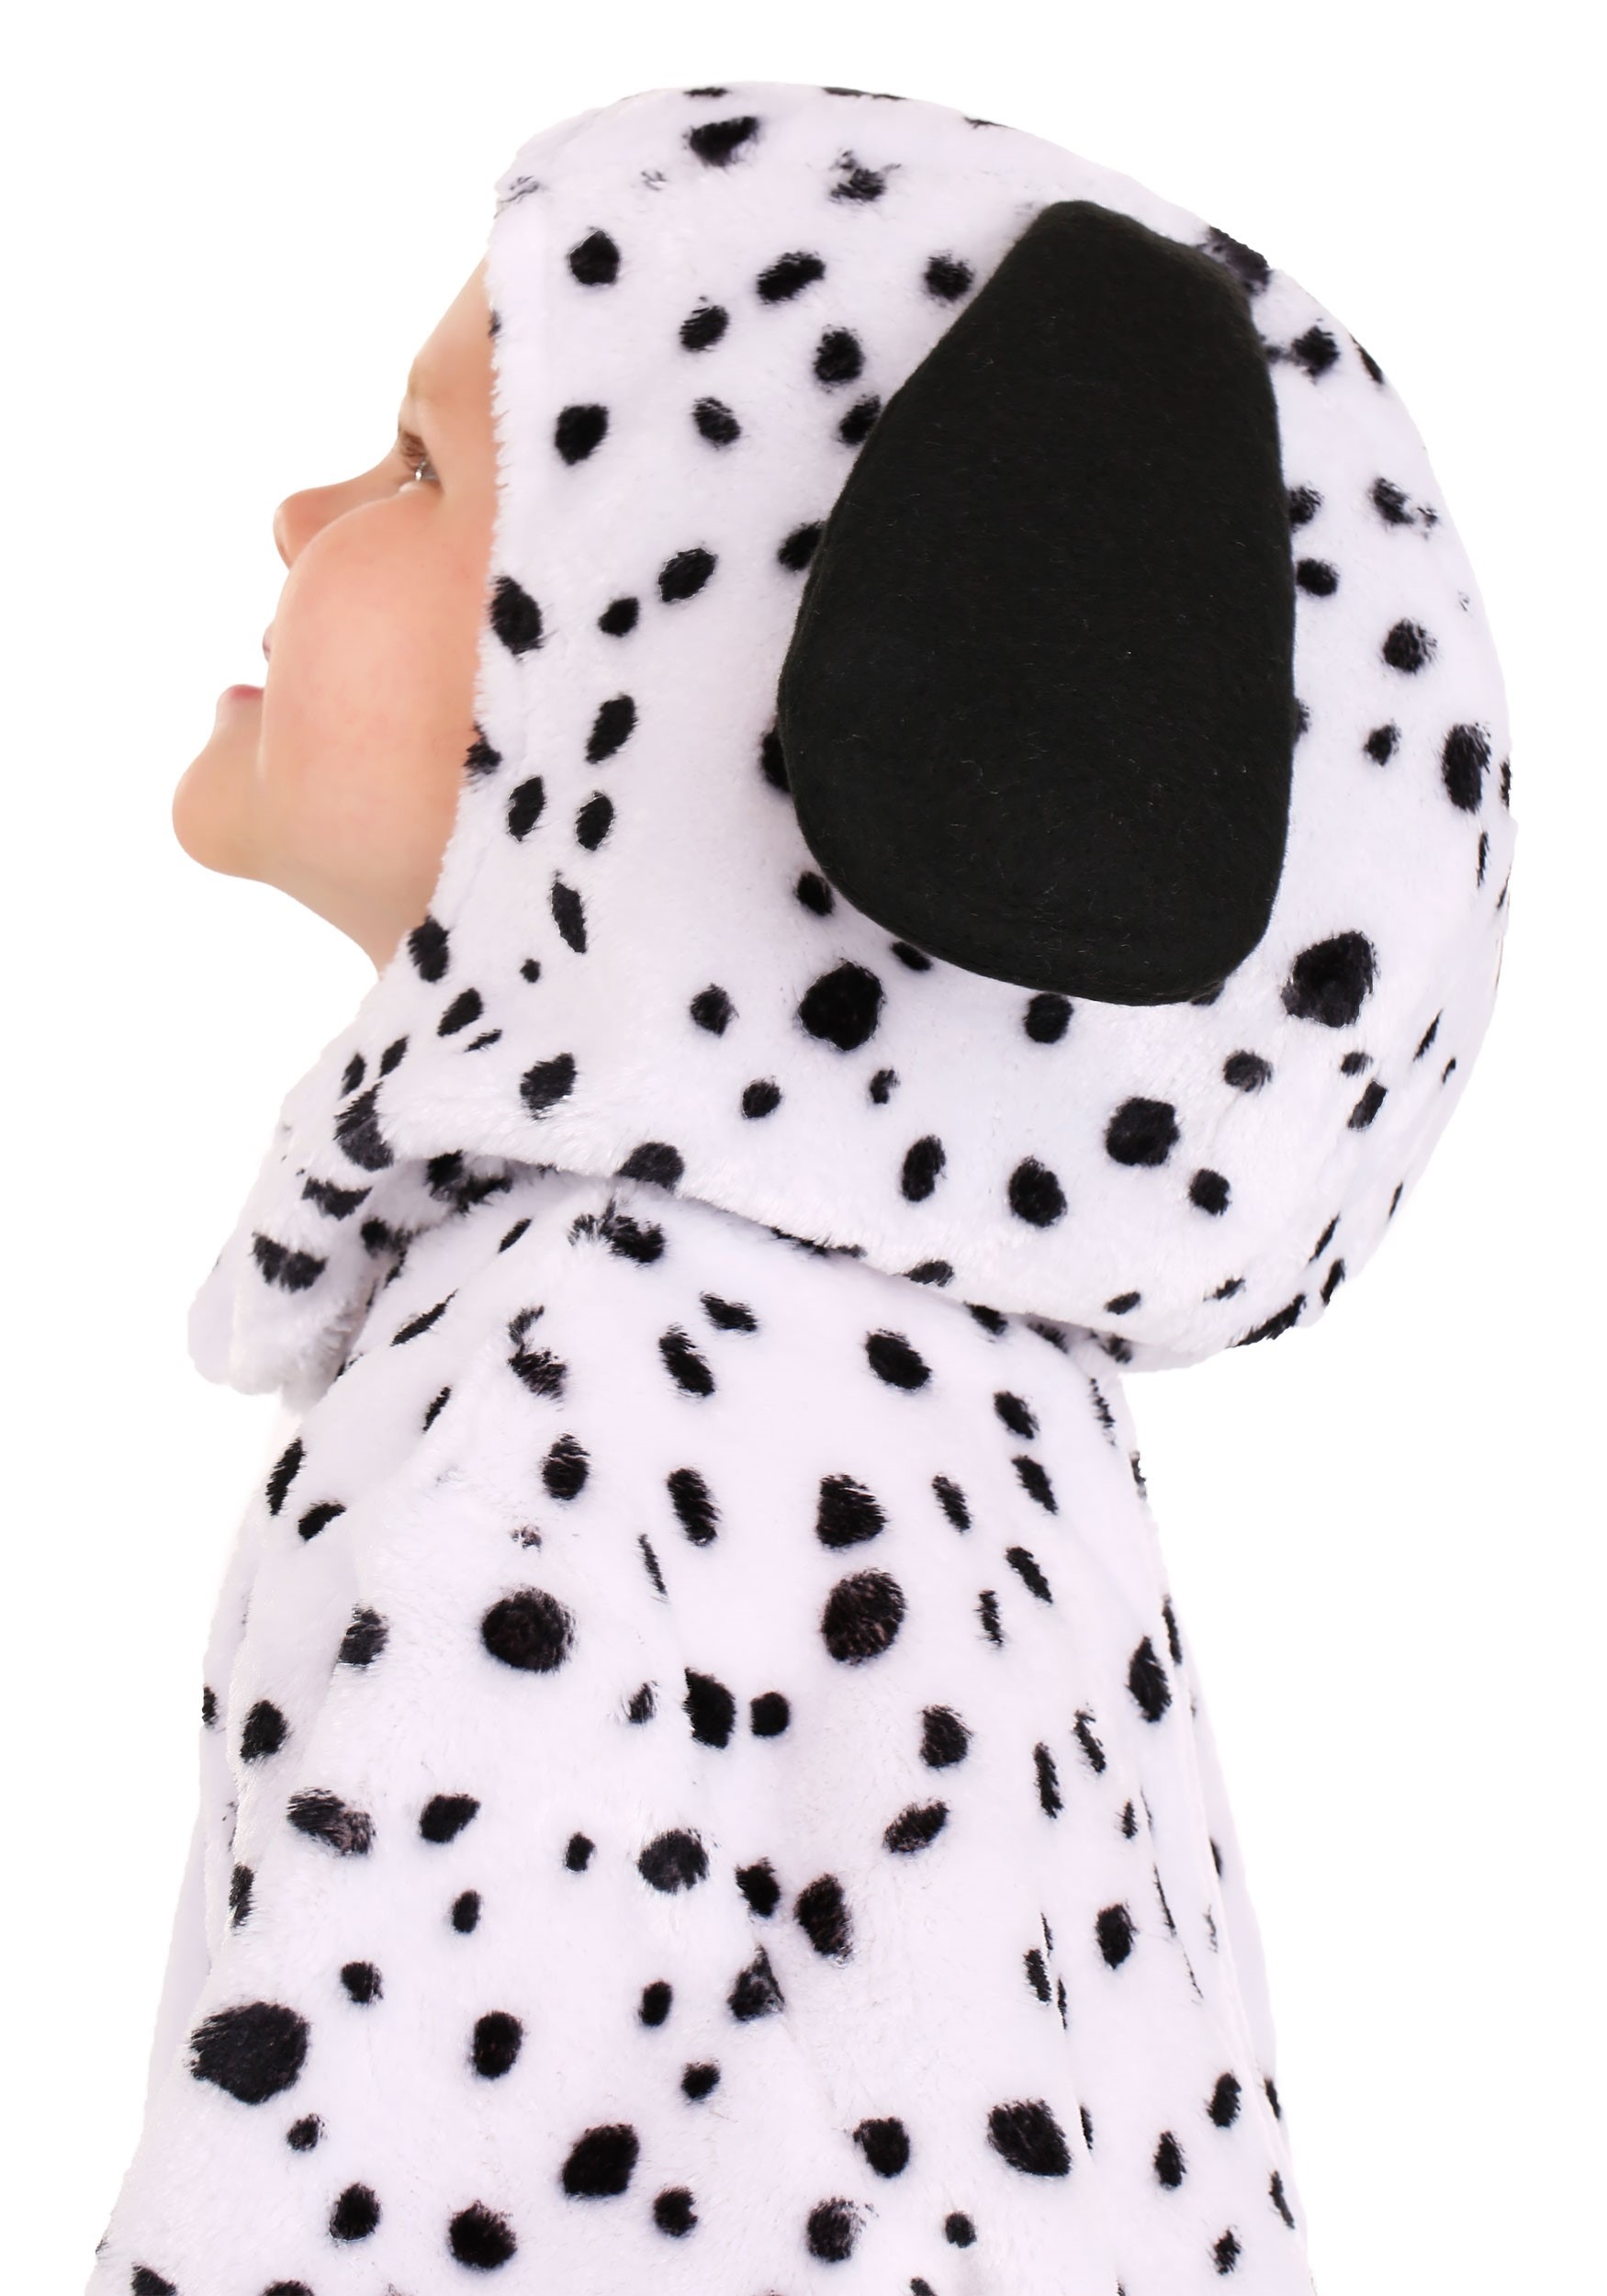 Toddler Dalmatian Costume Exclusive Made By Us